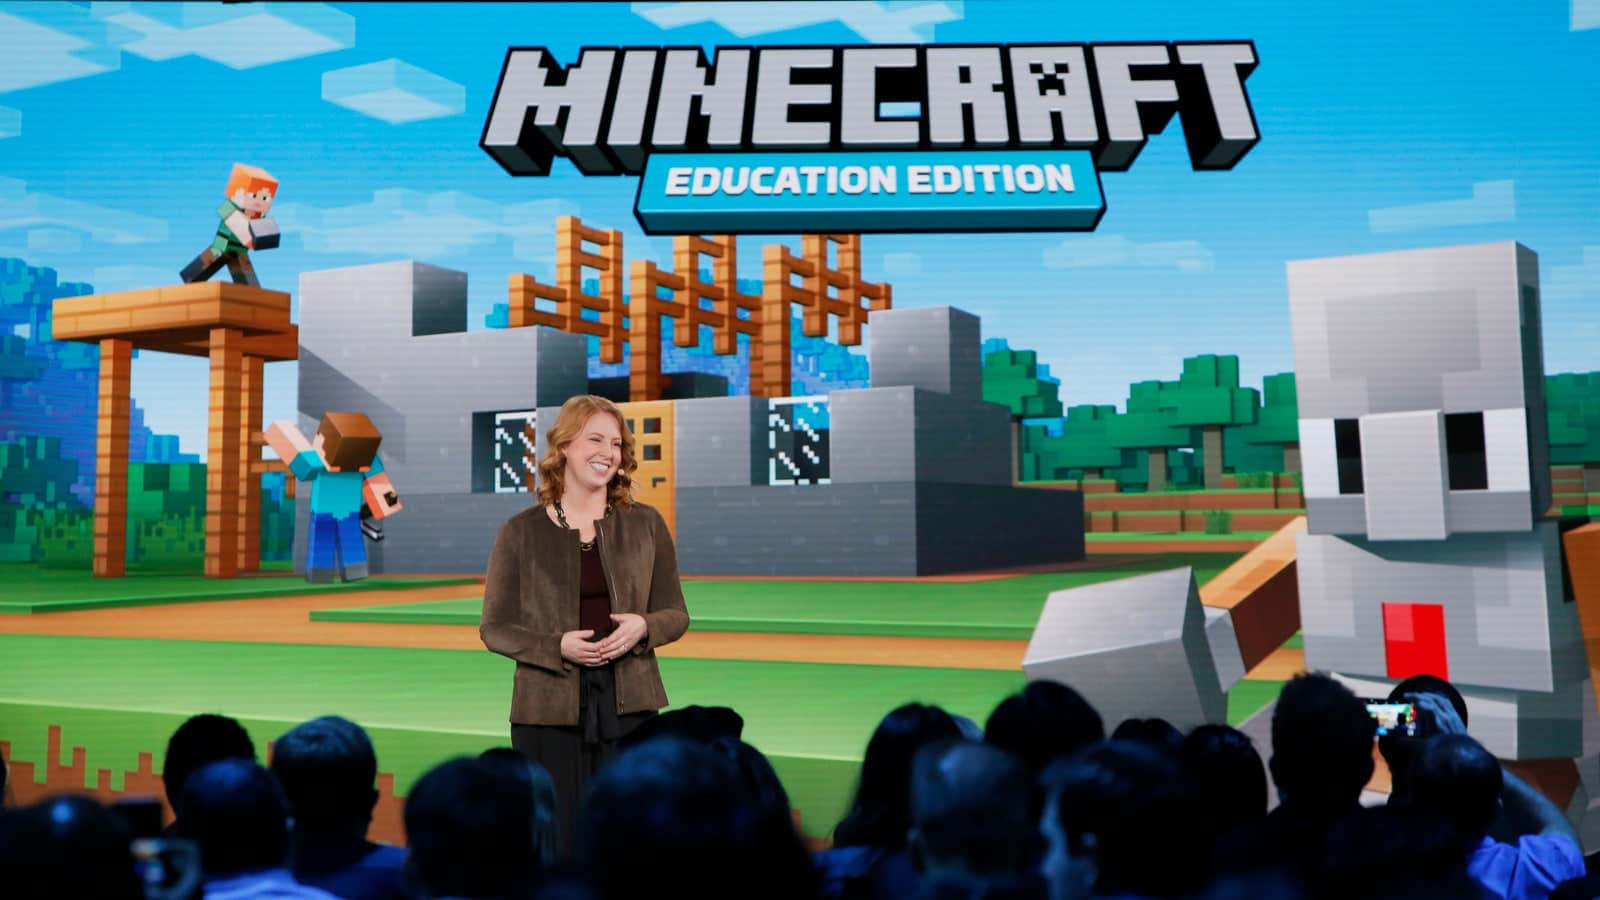 Minecraft Education Edition: Students learning and collaborating in a virtual classroom Wallpaper